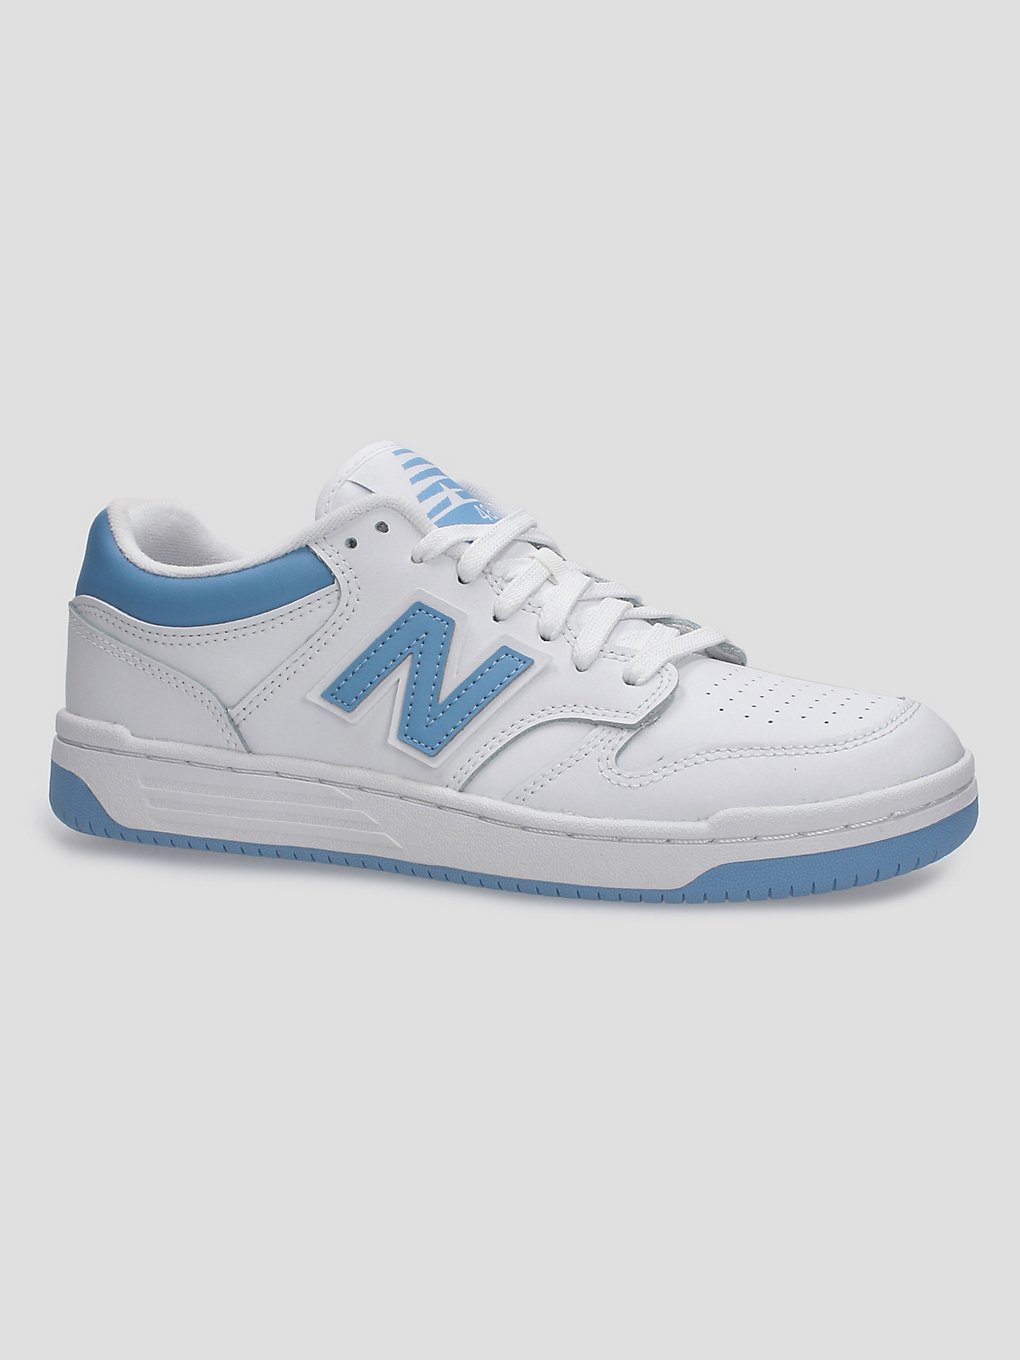 New Balance 480 Sneakers patroon